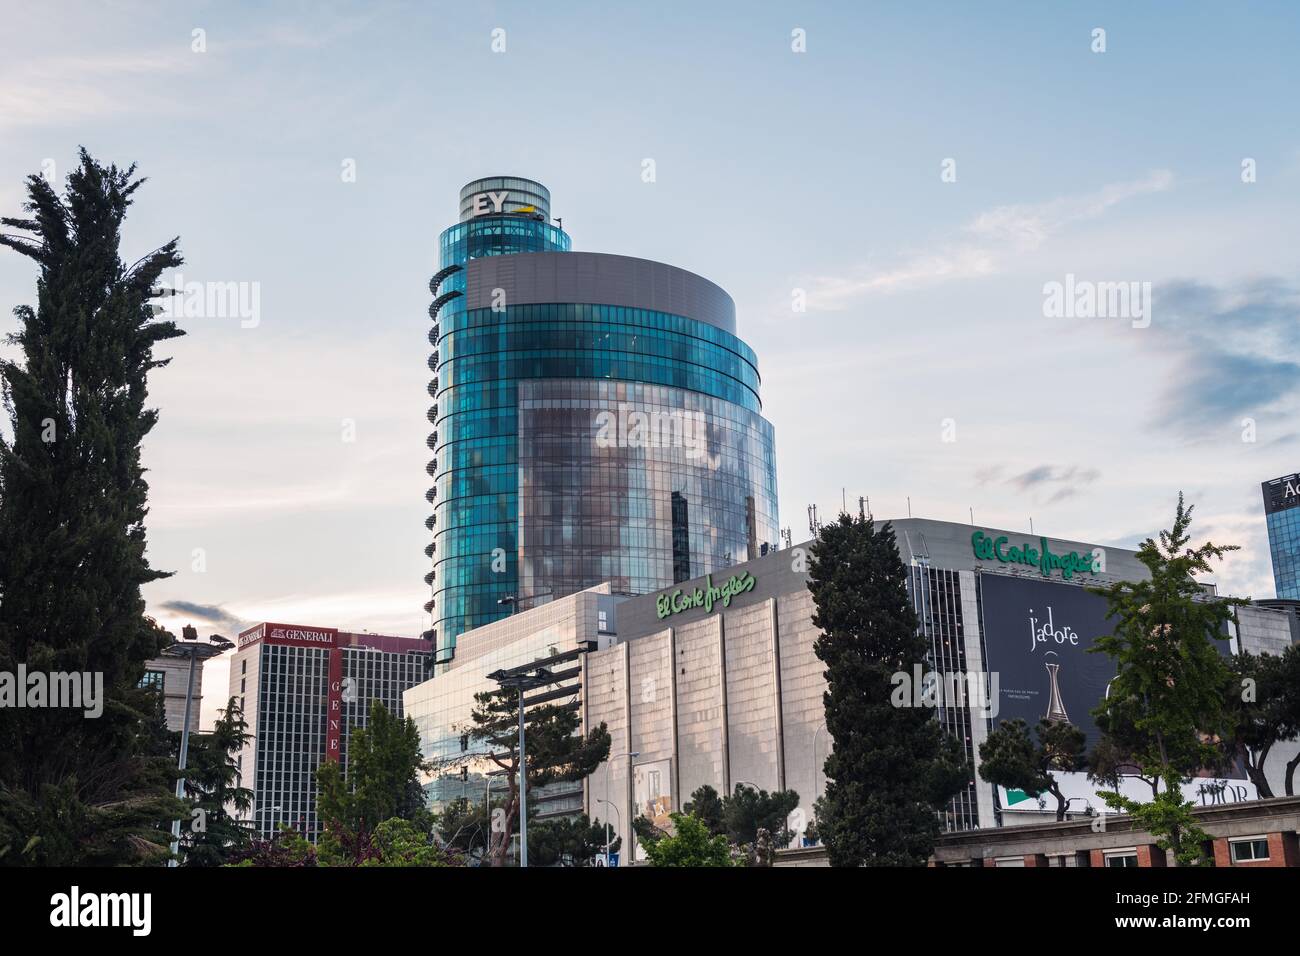 MADRID - MAY 2, 2021: Wide-angle view of AZCA business and financial district in Madrid at dusk as seen from the grounds of Nuevos Ministerios, Spain. Stock Photo